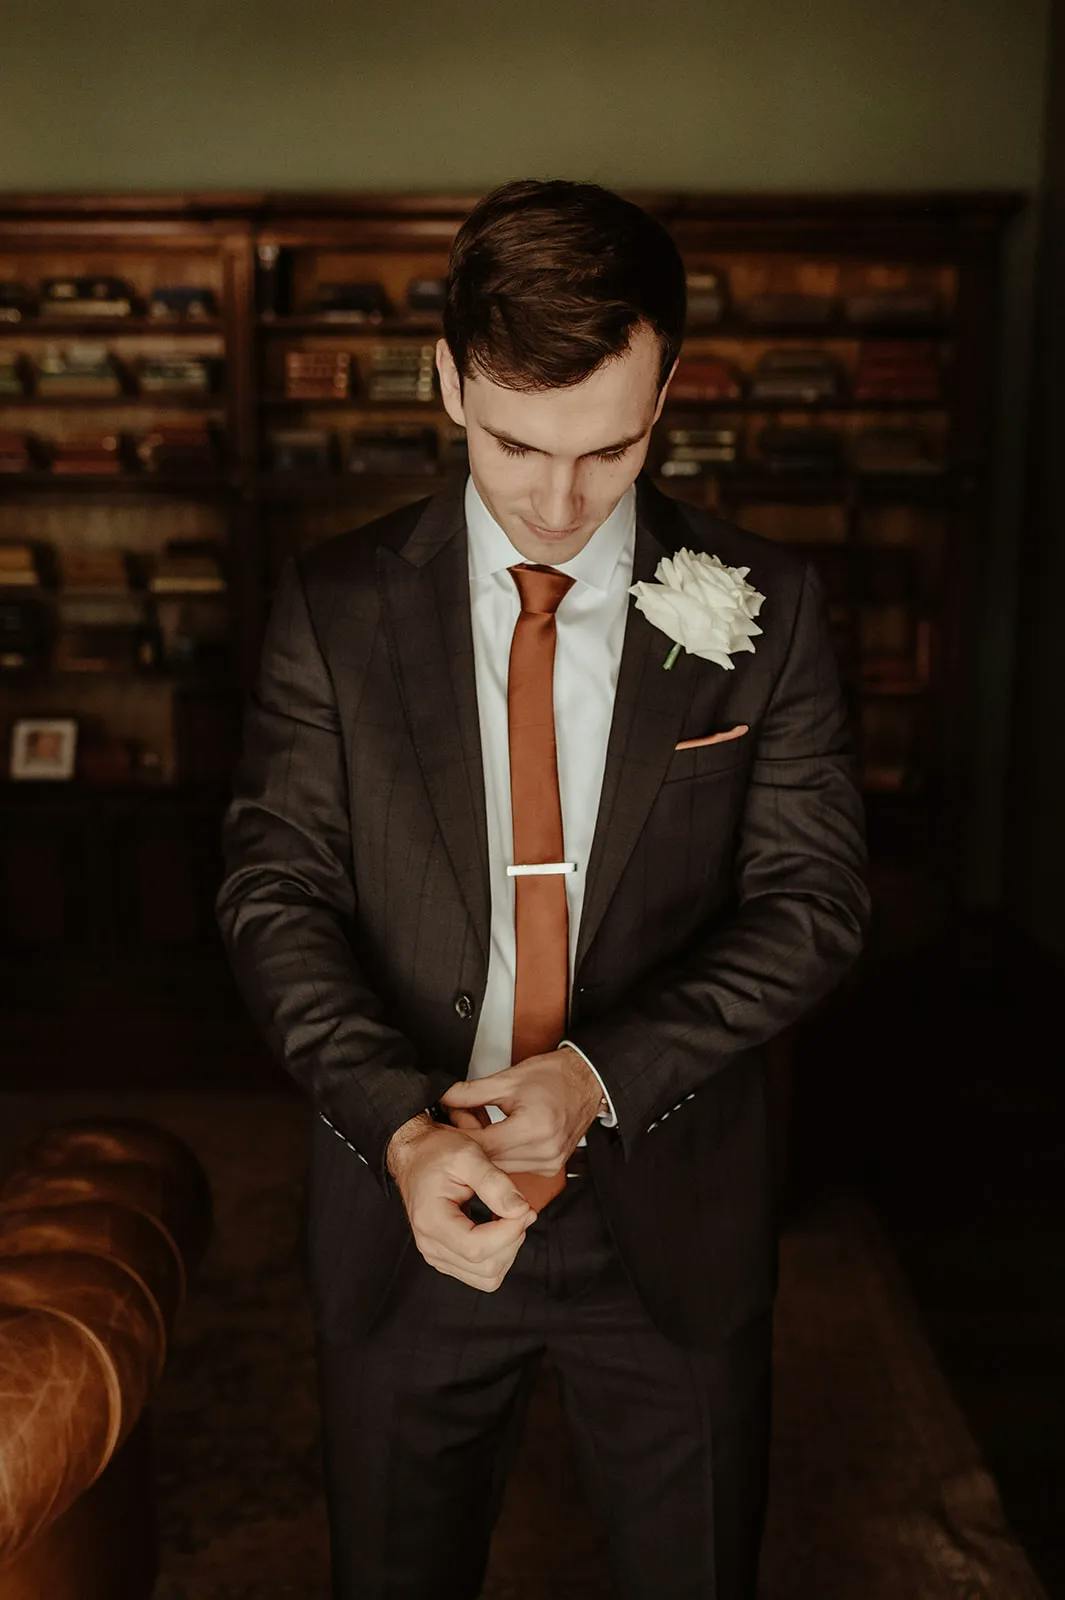 A man in a dark suit with a white boutonniere stands indoors, adjusting his cufflinks. He has a copper-colored tie and a tie clip. Behind him is a wooden bookshelf filled with books. The lighting is warm, creating a sophisticated and elegant atmosphere.